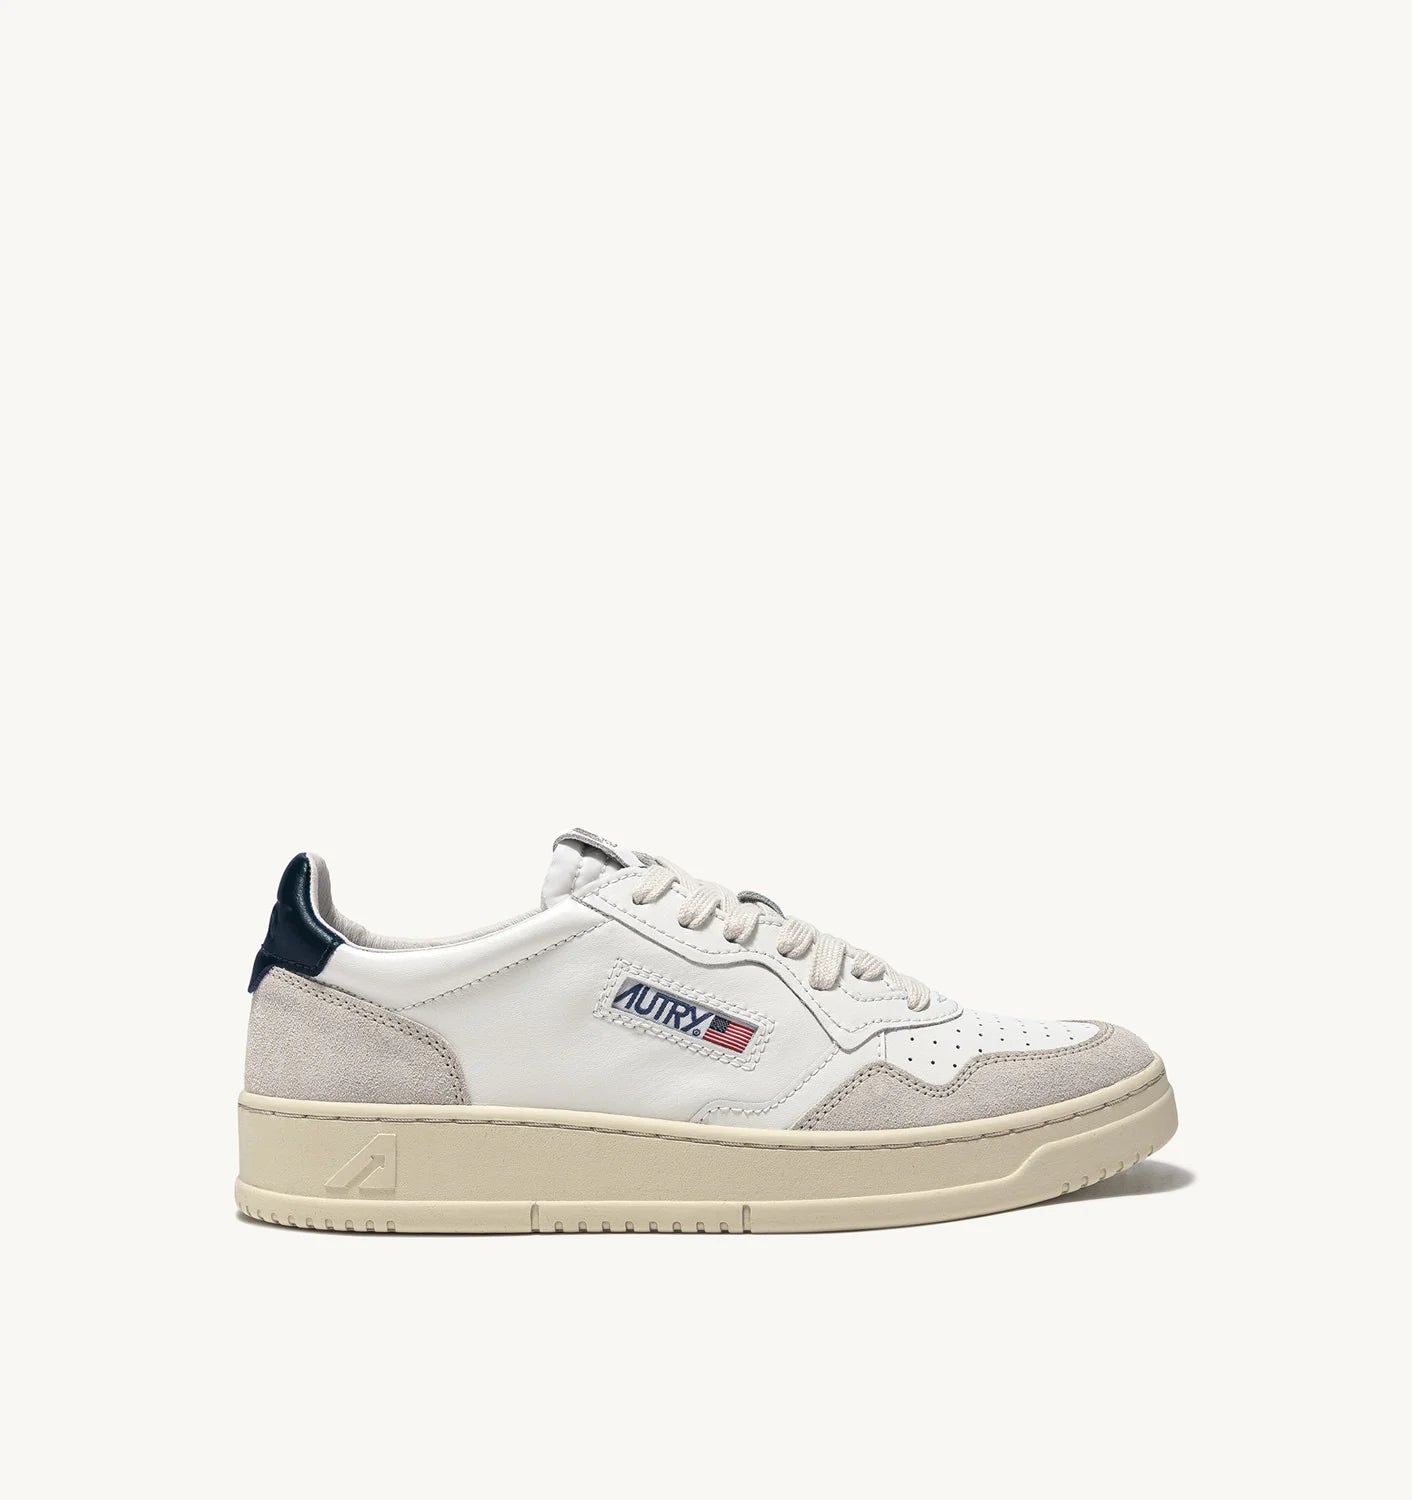 Autry LS28 White/Navy sneakers